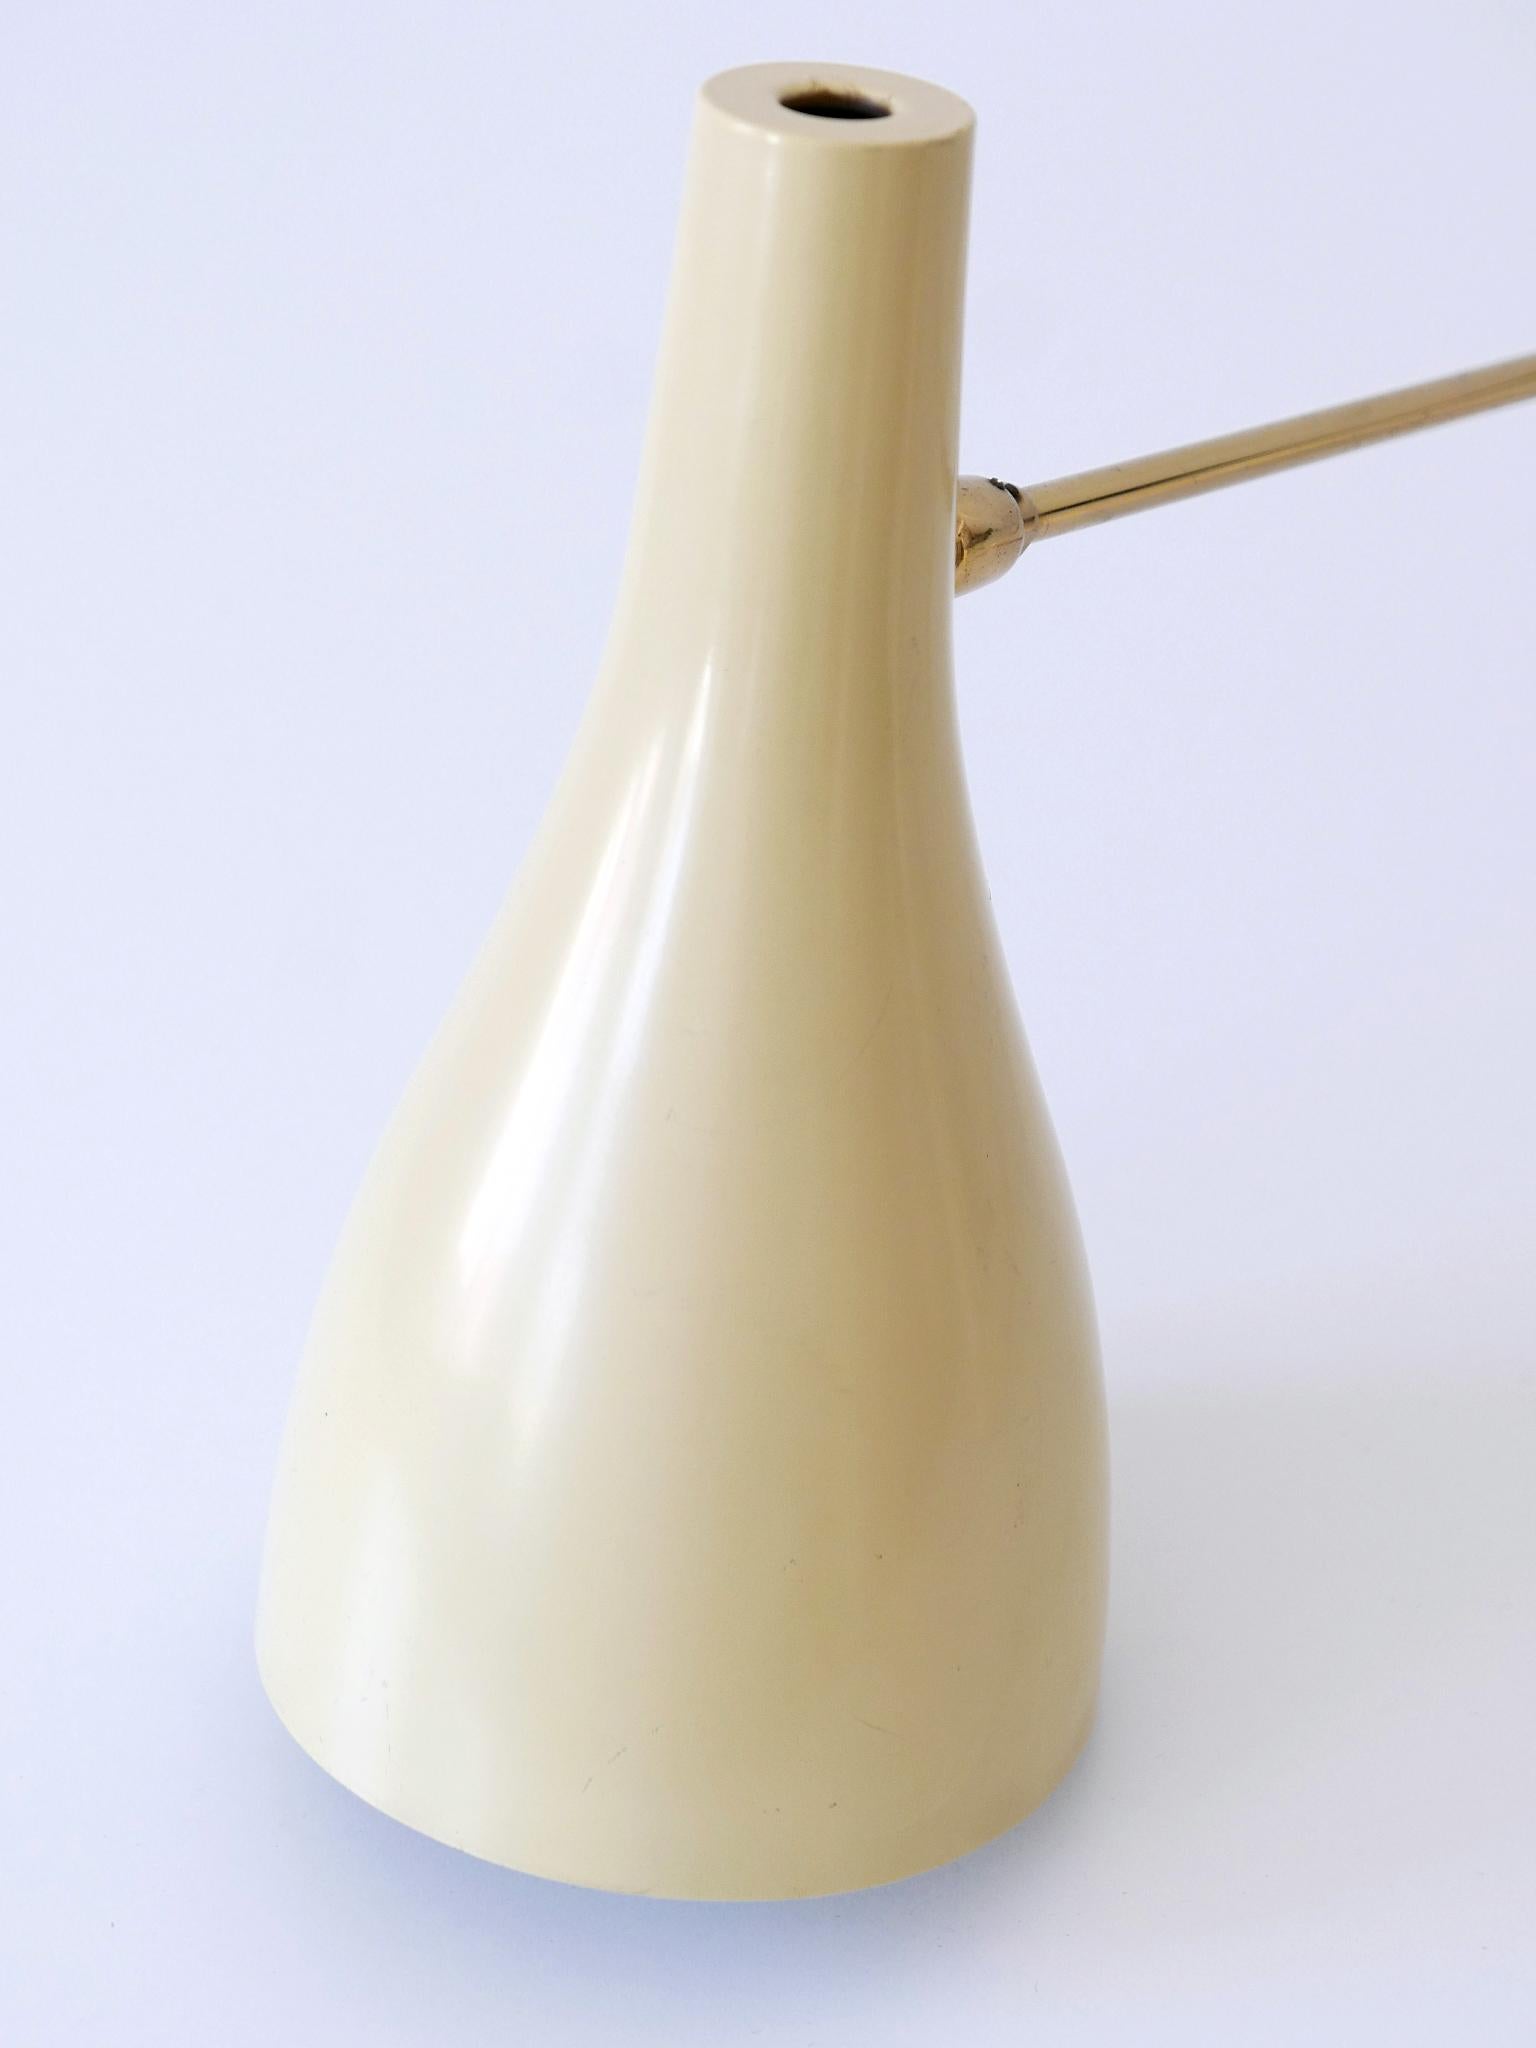 Rare & Elegant Mid Century Modern Wall Lamp '9590/28' by Cosack Germany 1950s For Sale 10